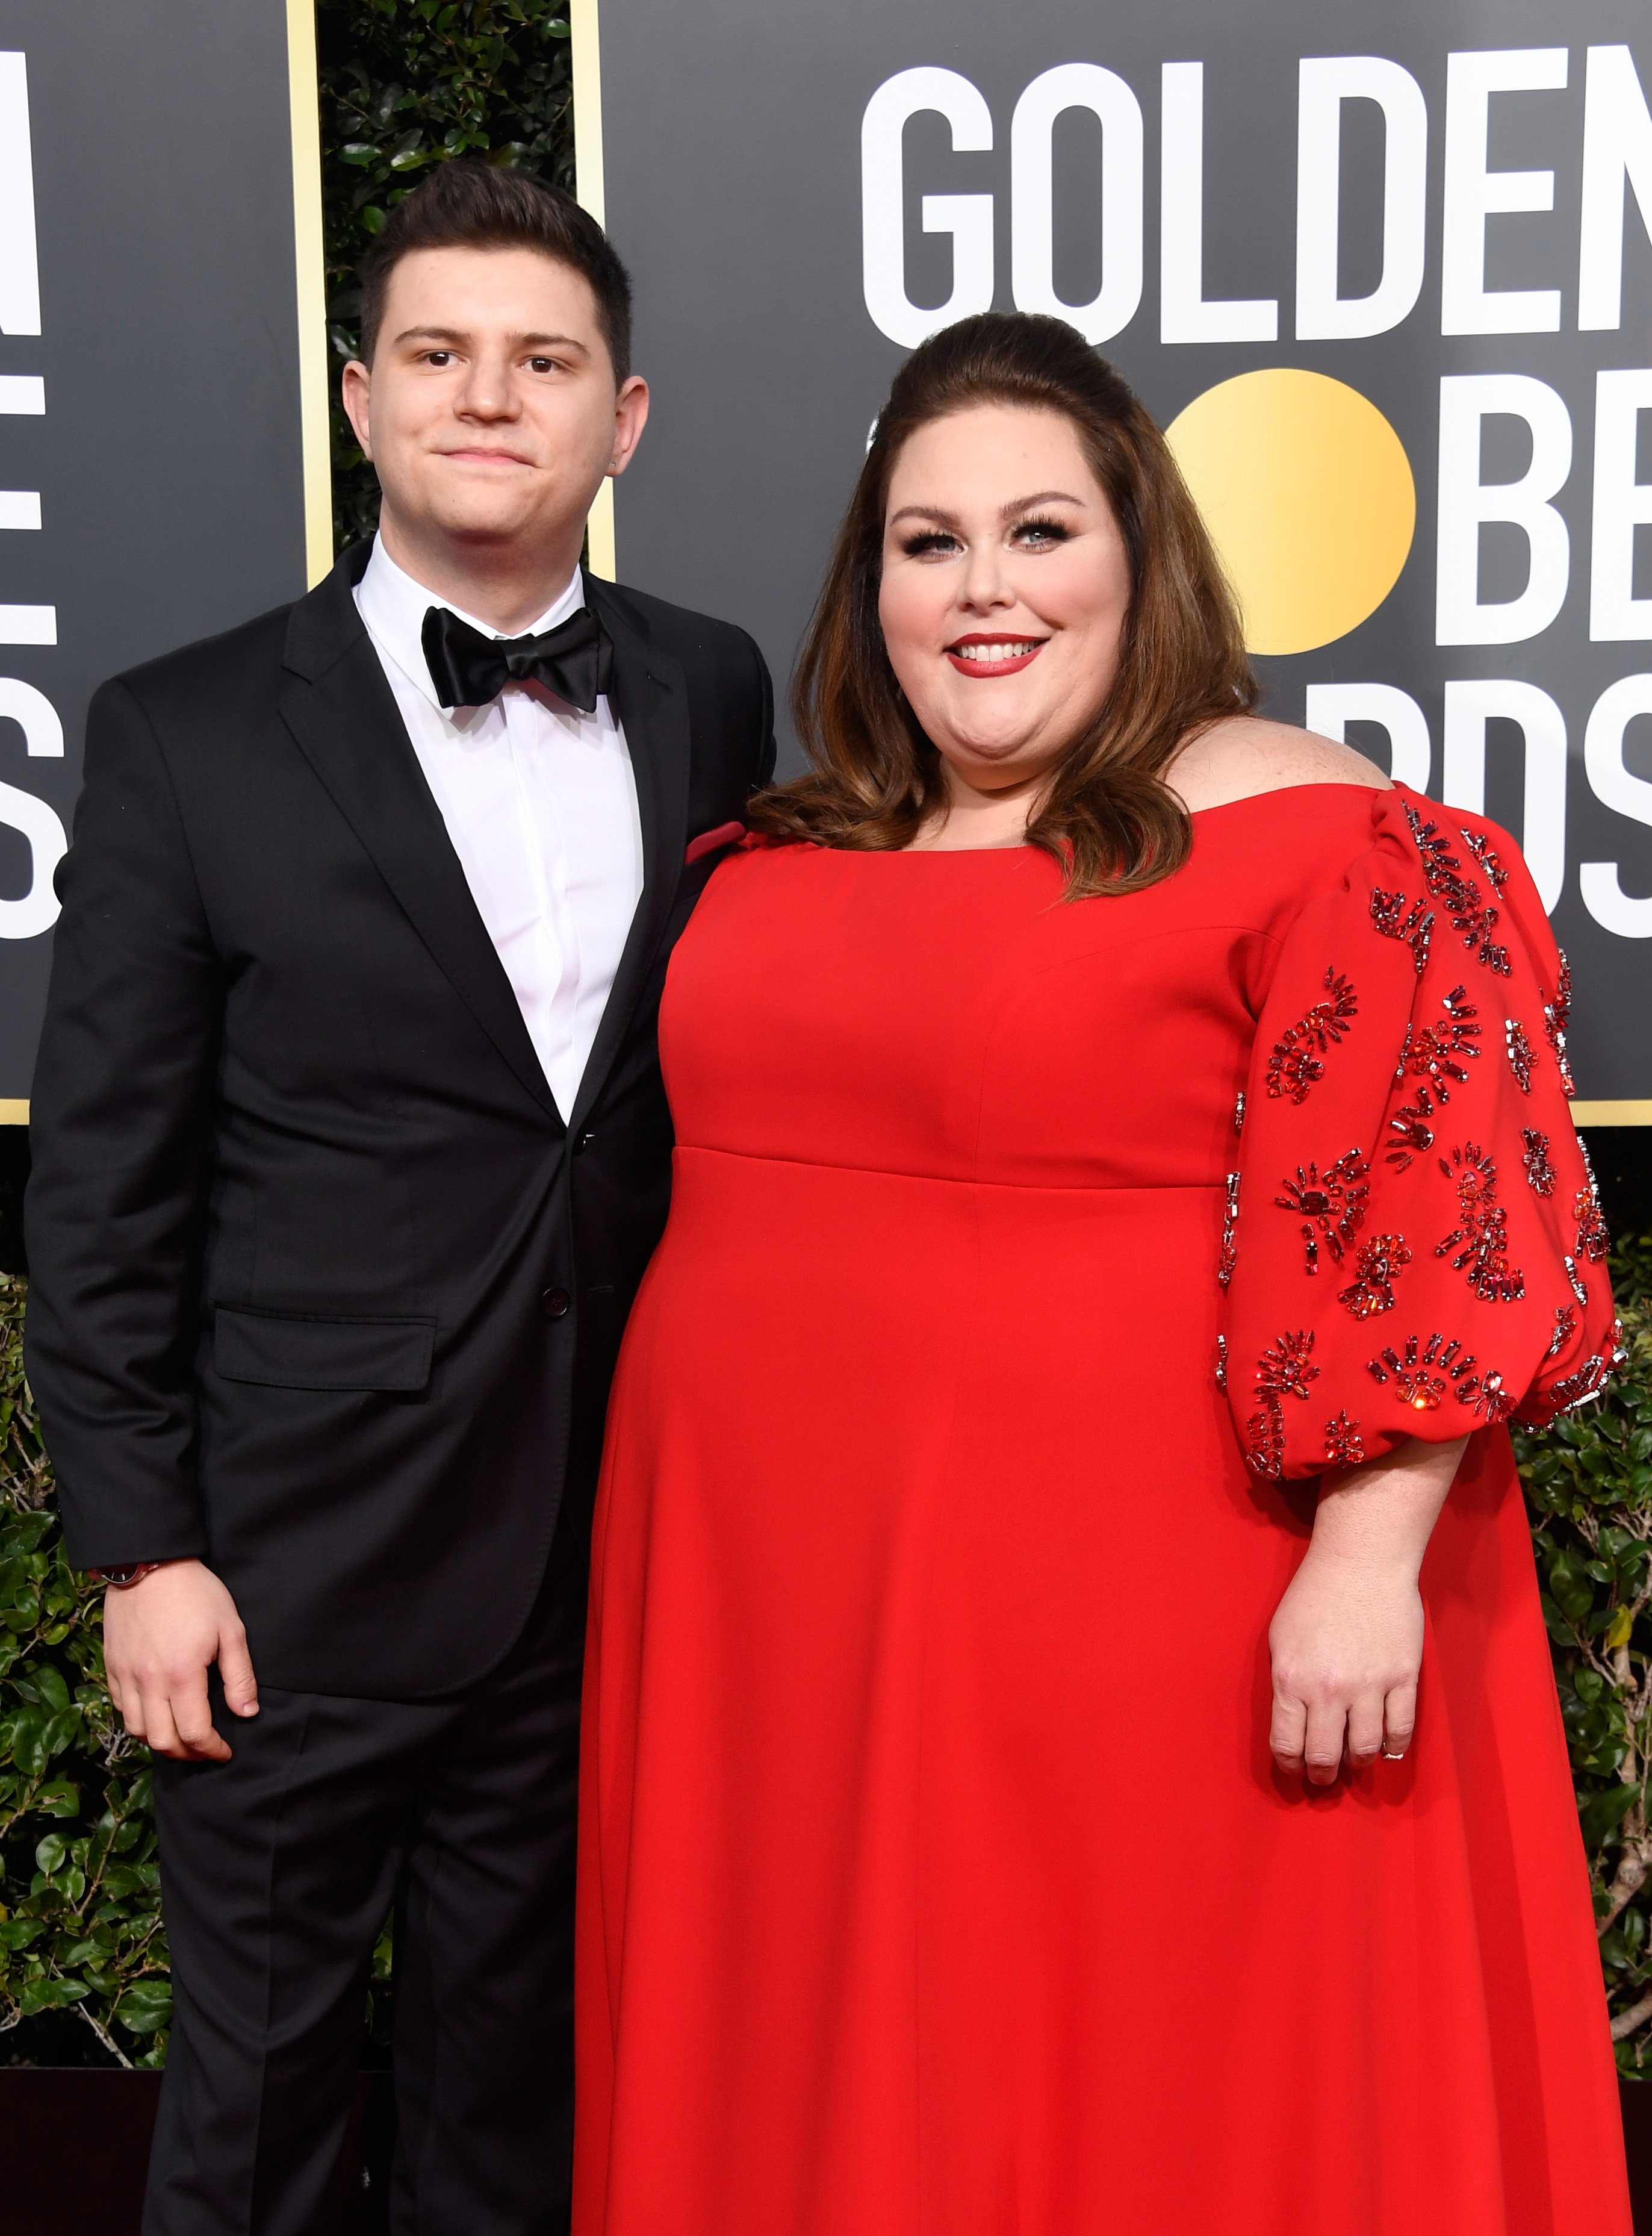 Hal Rosenfeld and Chrissy Metz attend the 76th Annual Golden Globe Awards, 2019, Beverly Hills, California. | Photo: Getty Images